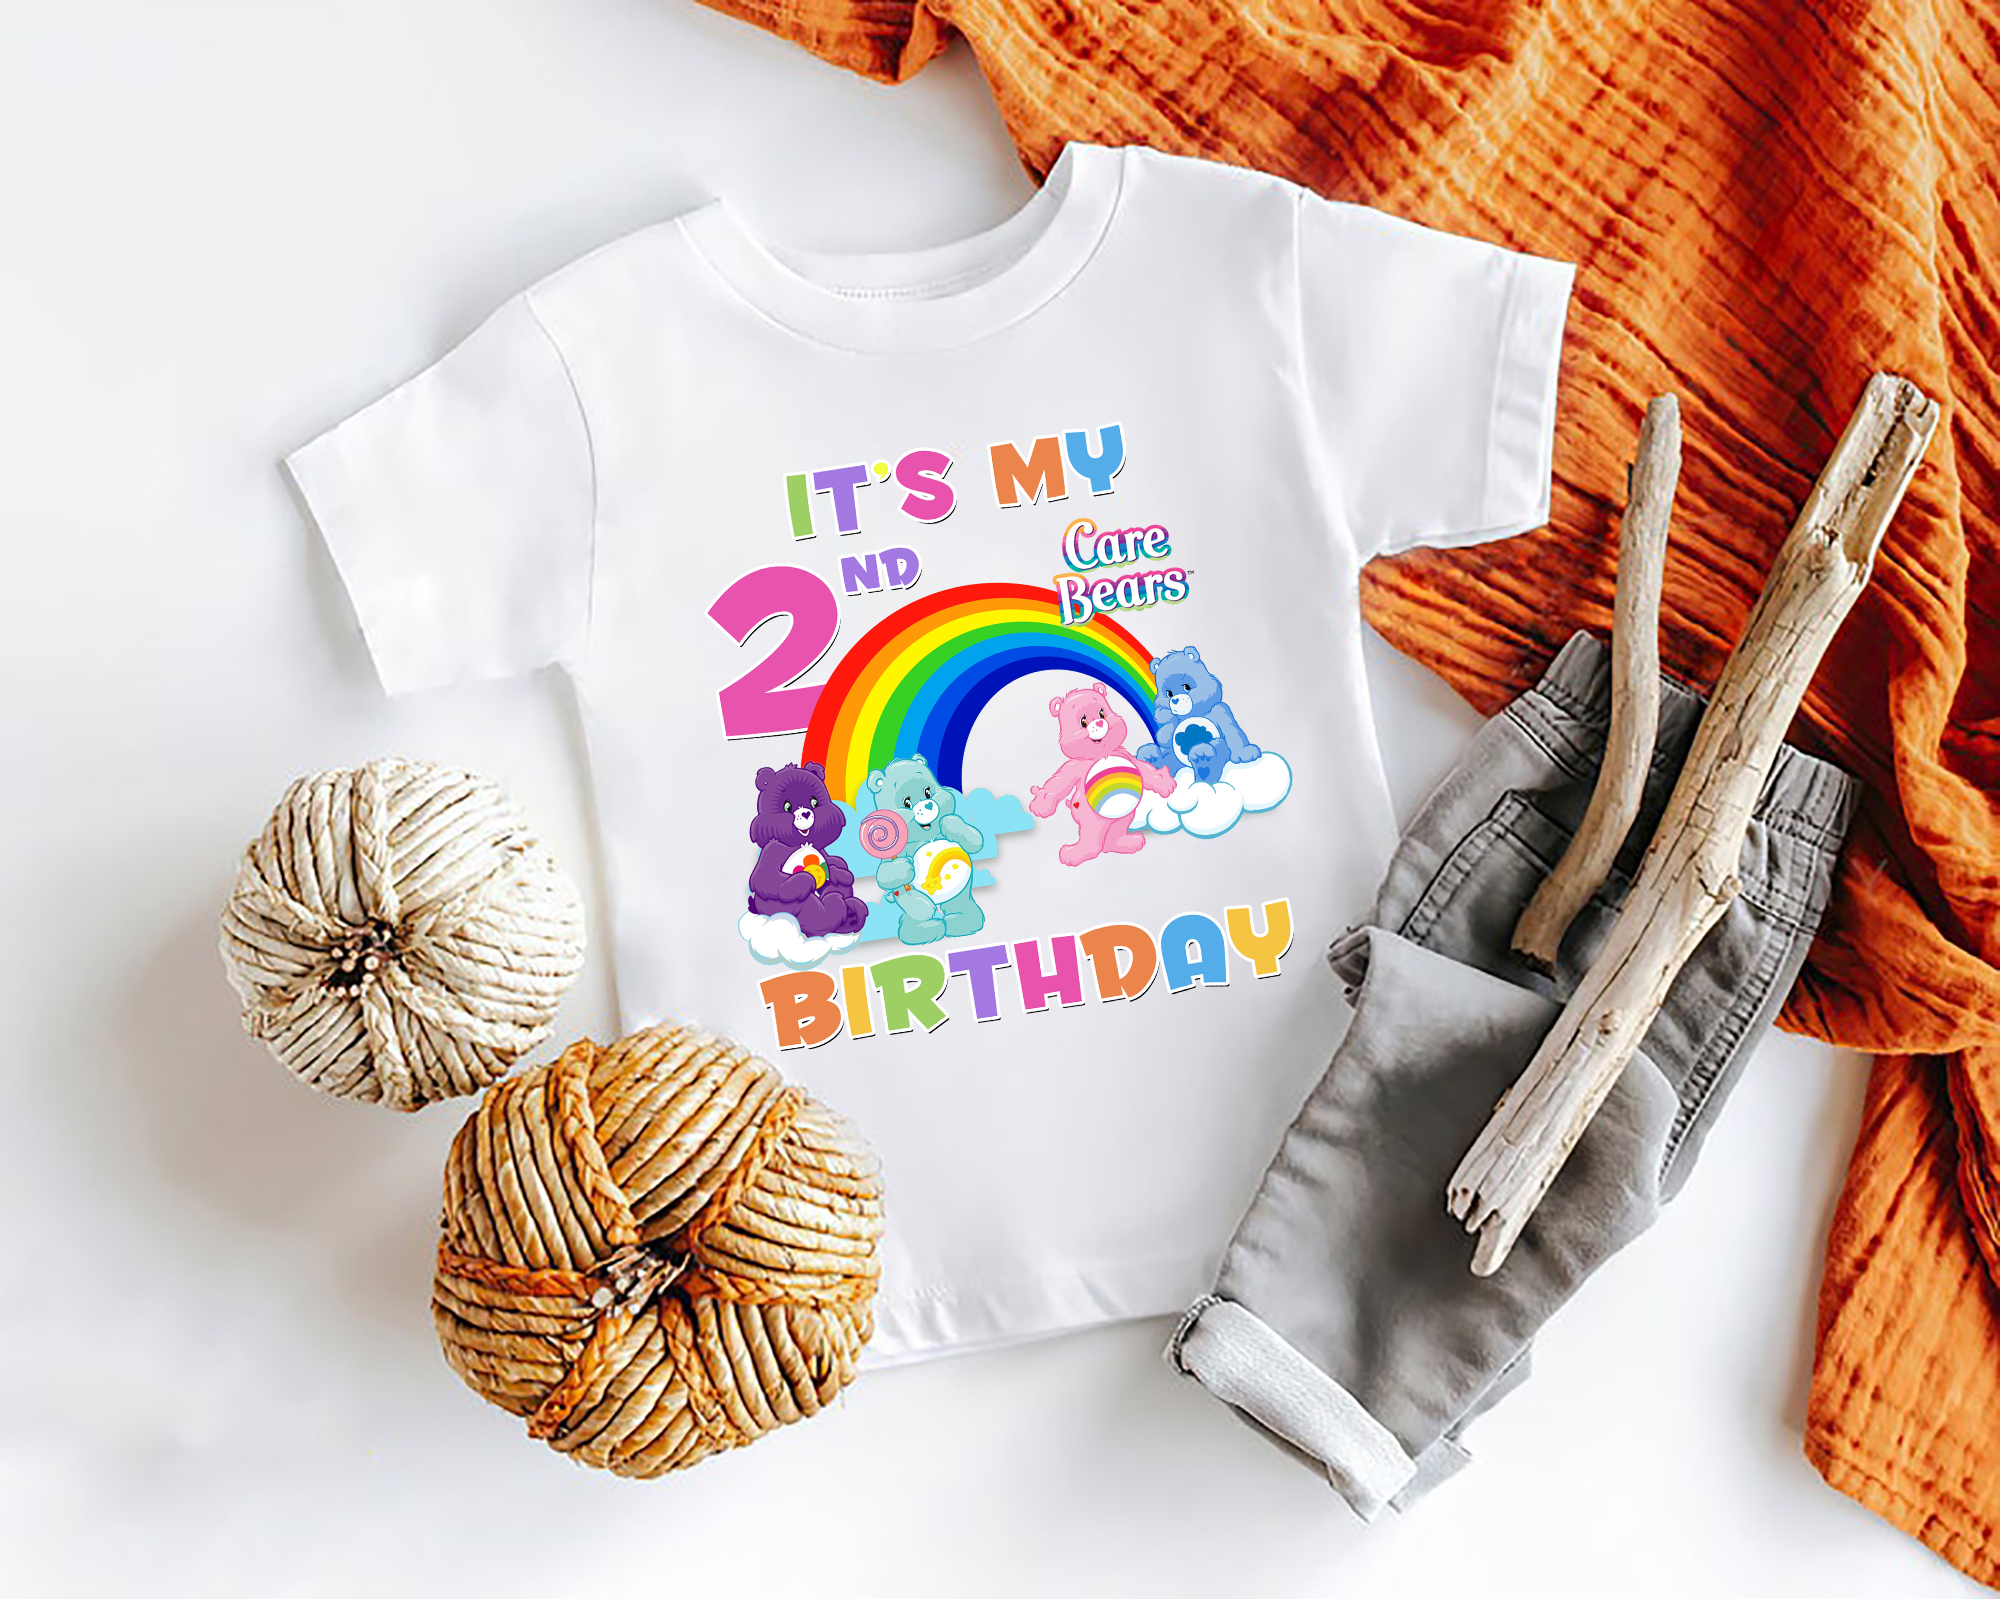 Personalized Care Bear Birthday Shirt Set, Care Bear Family Shirt, Care Bear Shirt, Custome Name And Age Shirt, Personalized Gifts